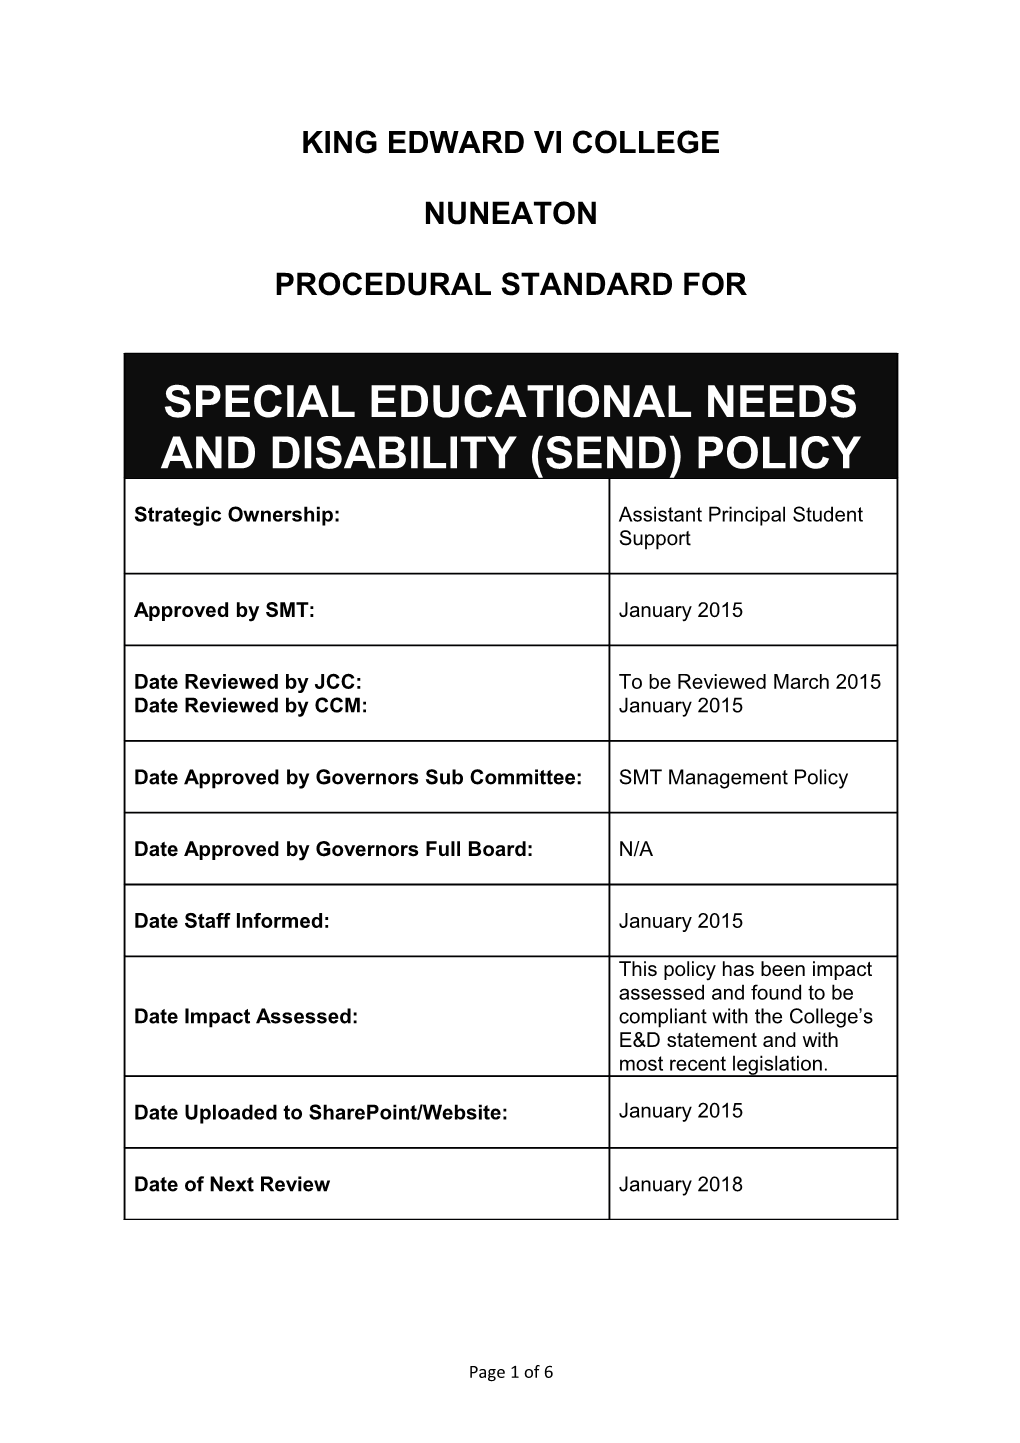 Special Educational Needs and Disability Policy (SEND)